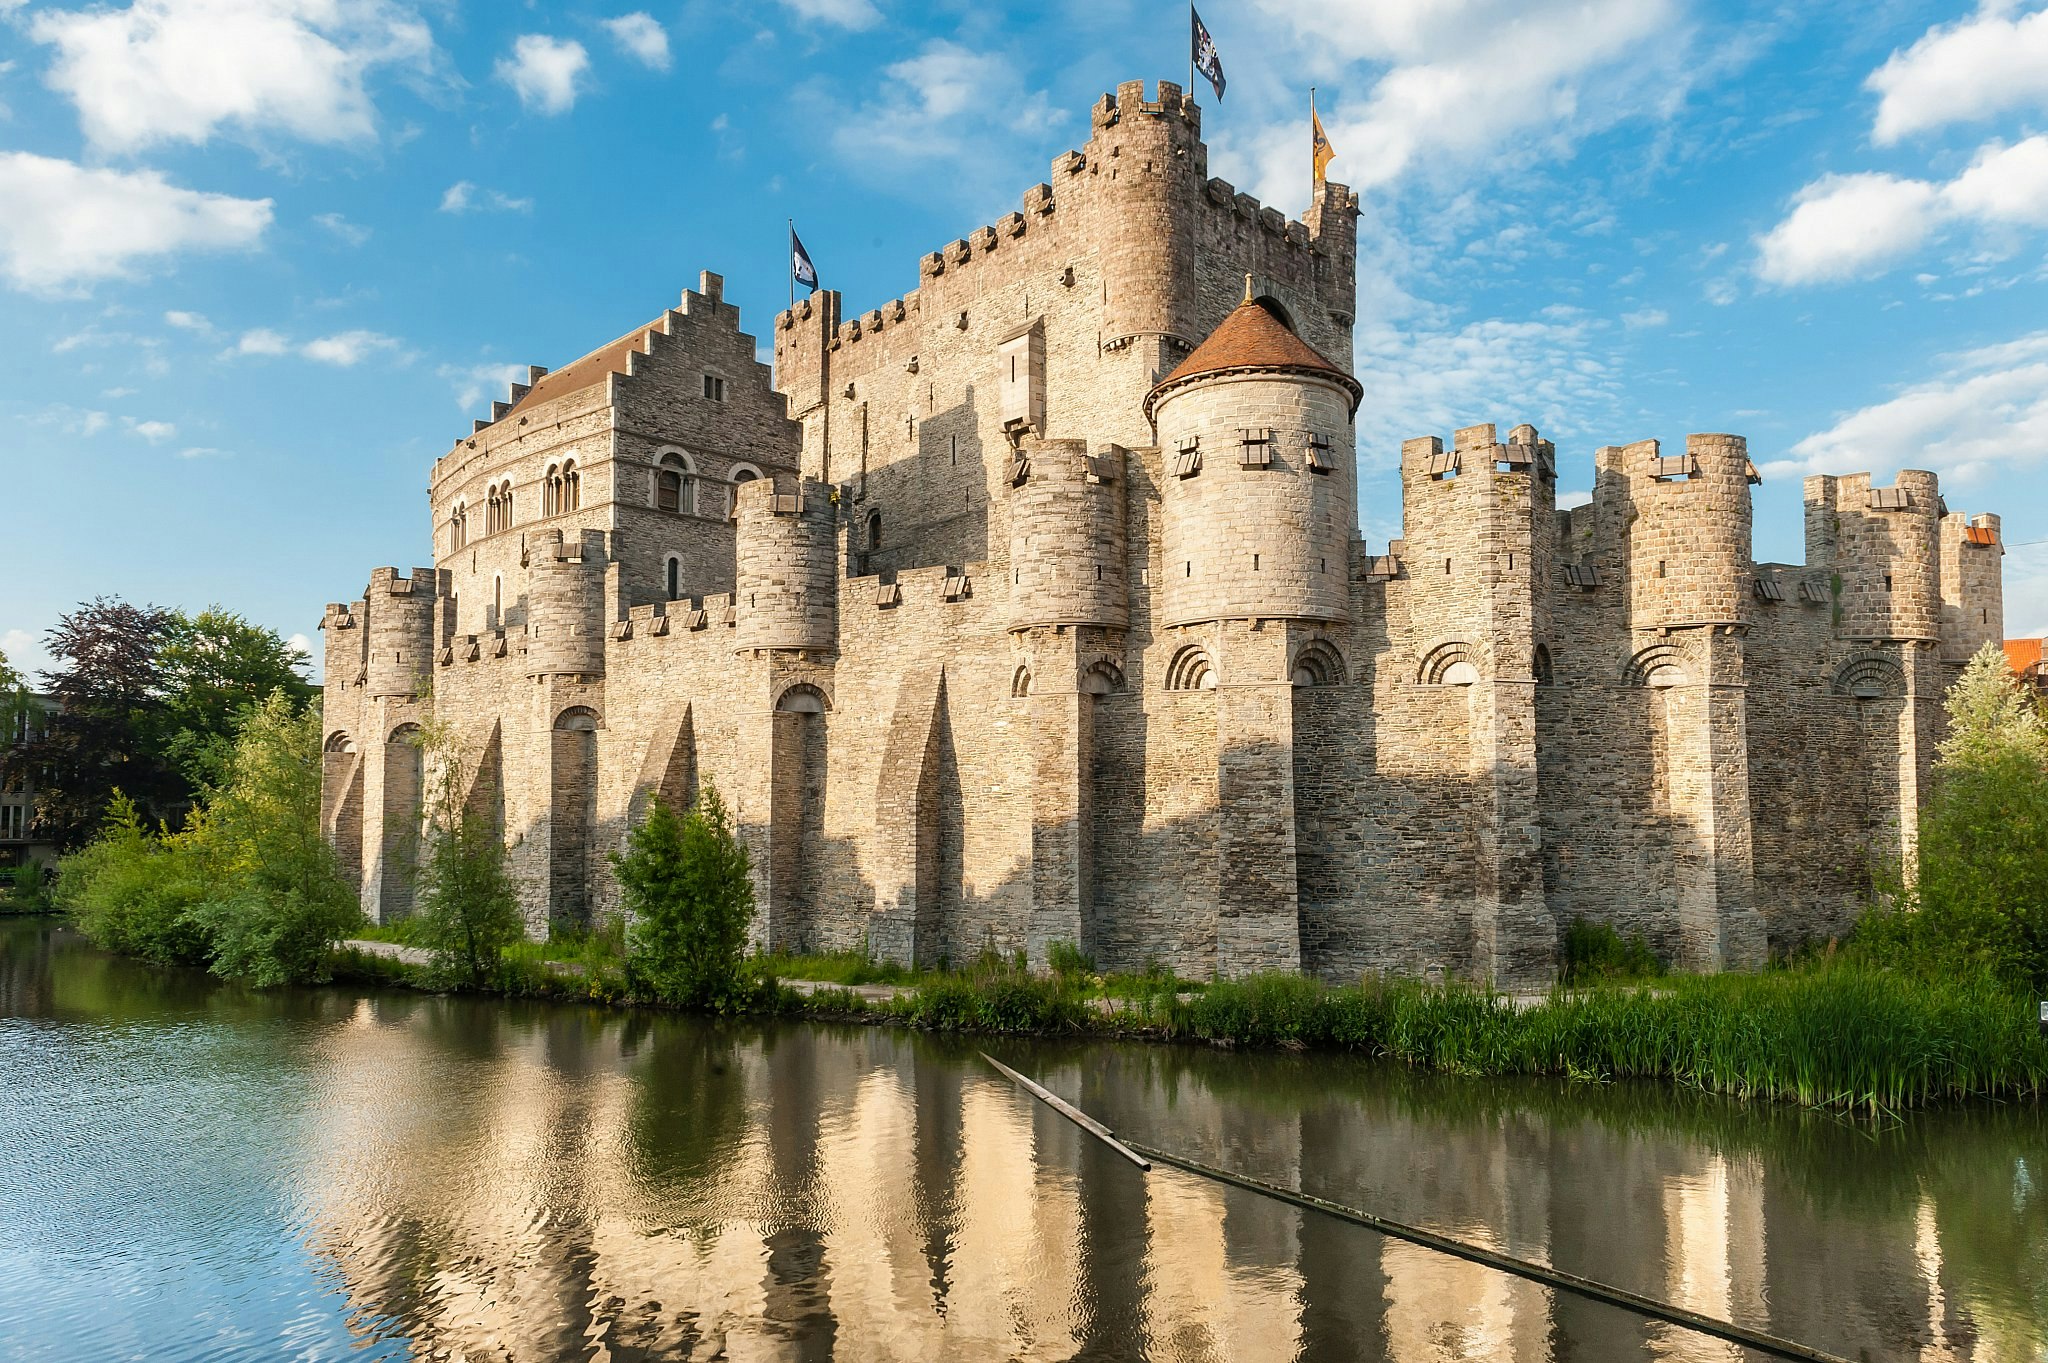 Gravensteen, a heavily fortified medieval castle surrounded by a moat in Ghent, with high walls and turrets.